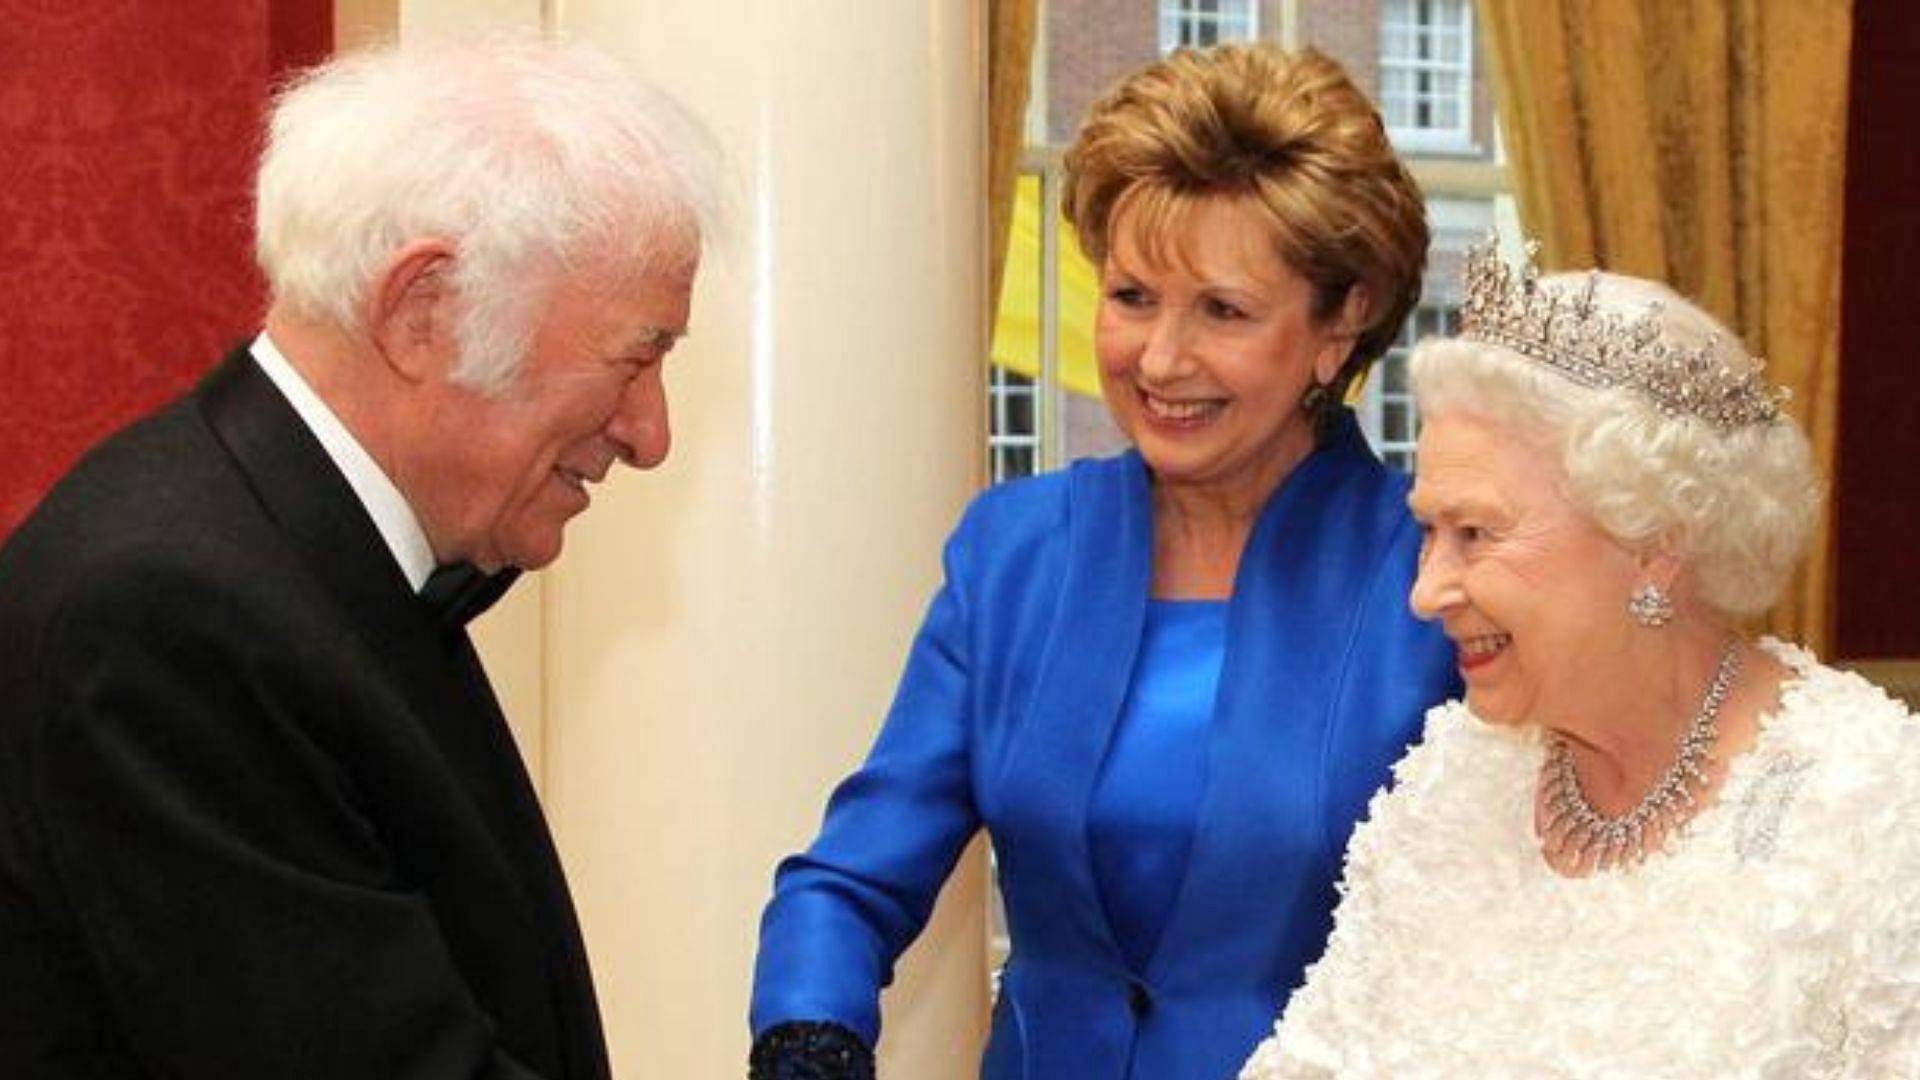 The Queen at the Irish State Dinner (Image via Daily News Era)